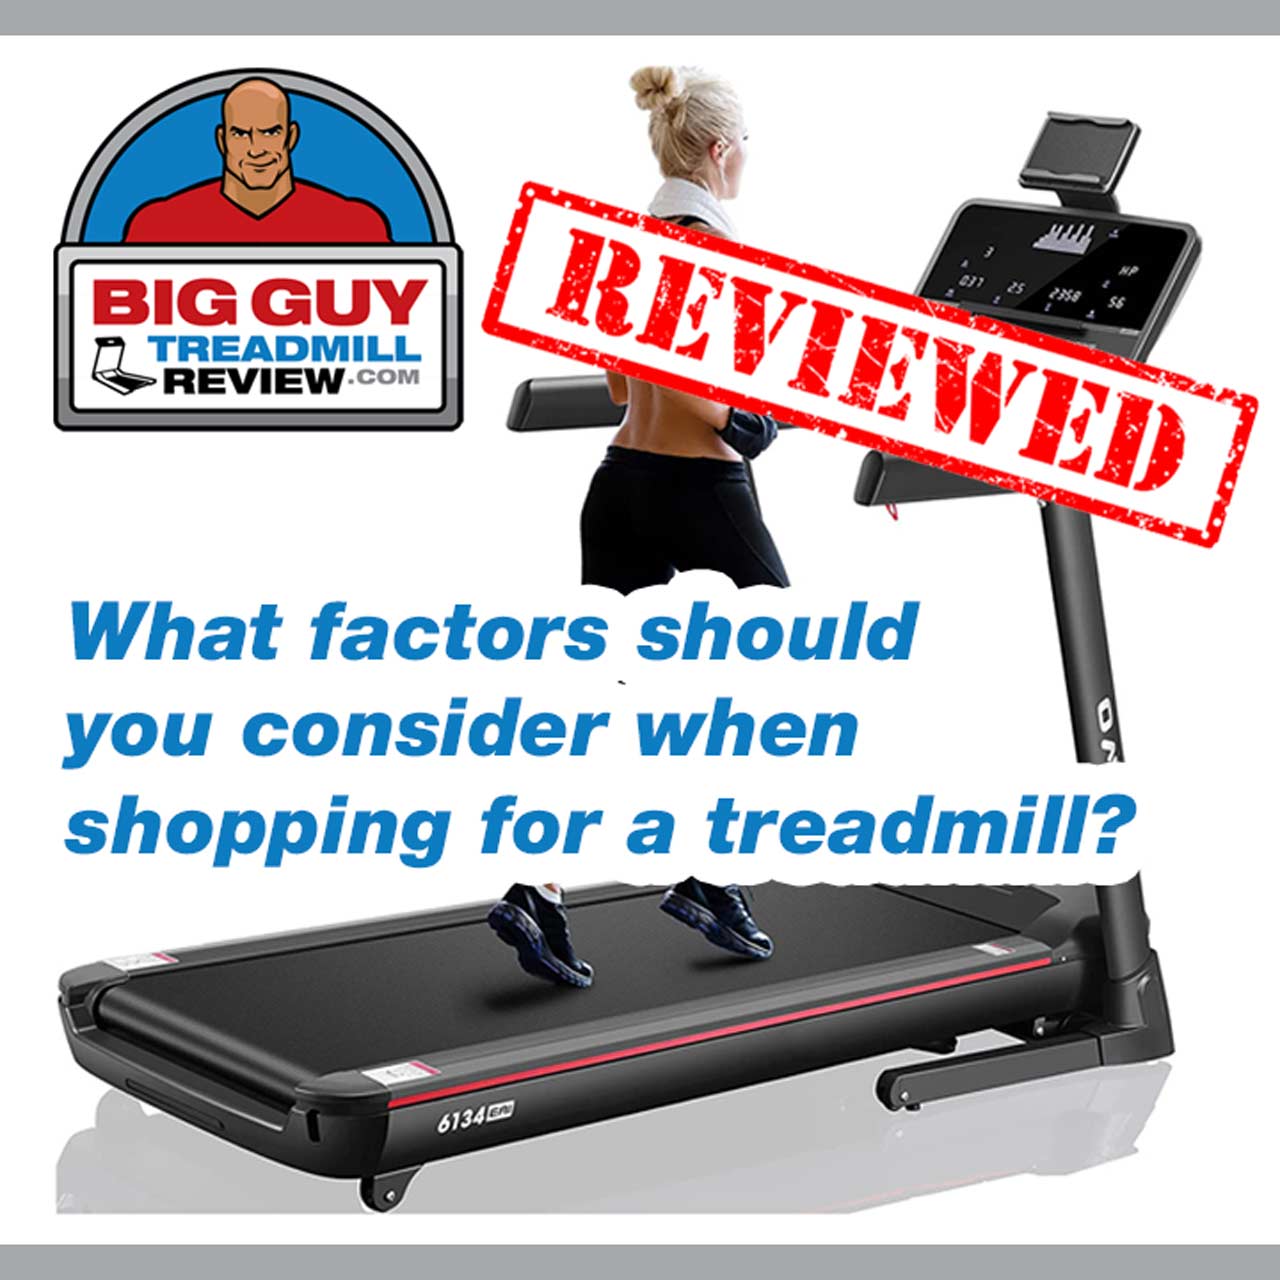 What factors should you consider when shopping for a treadmill